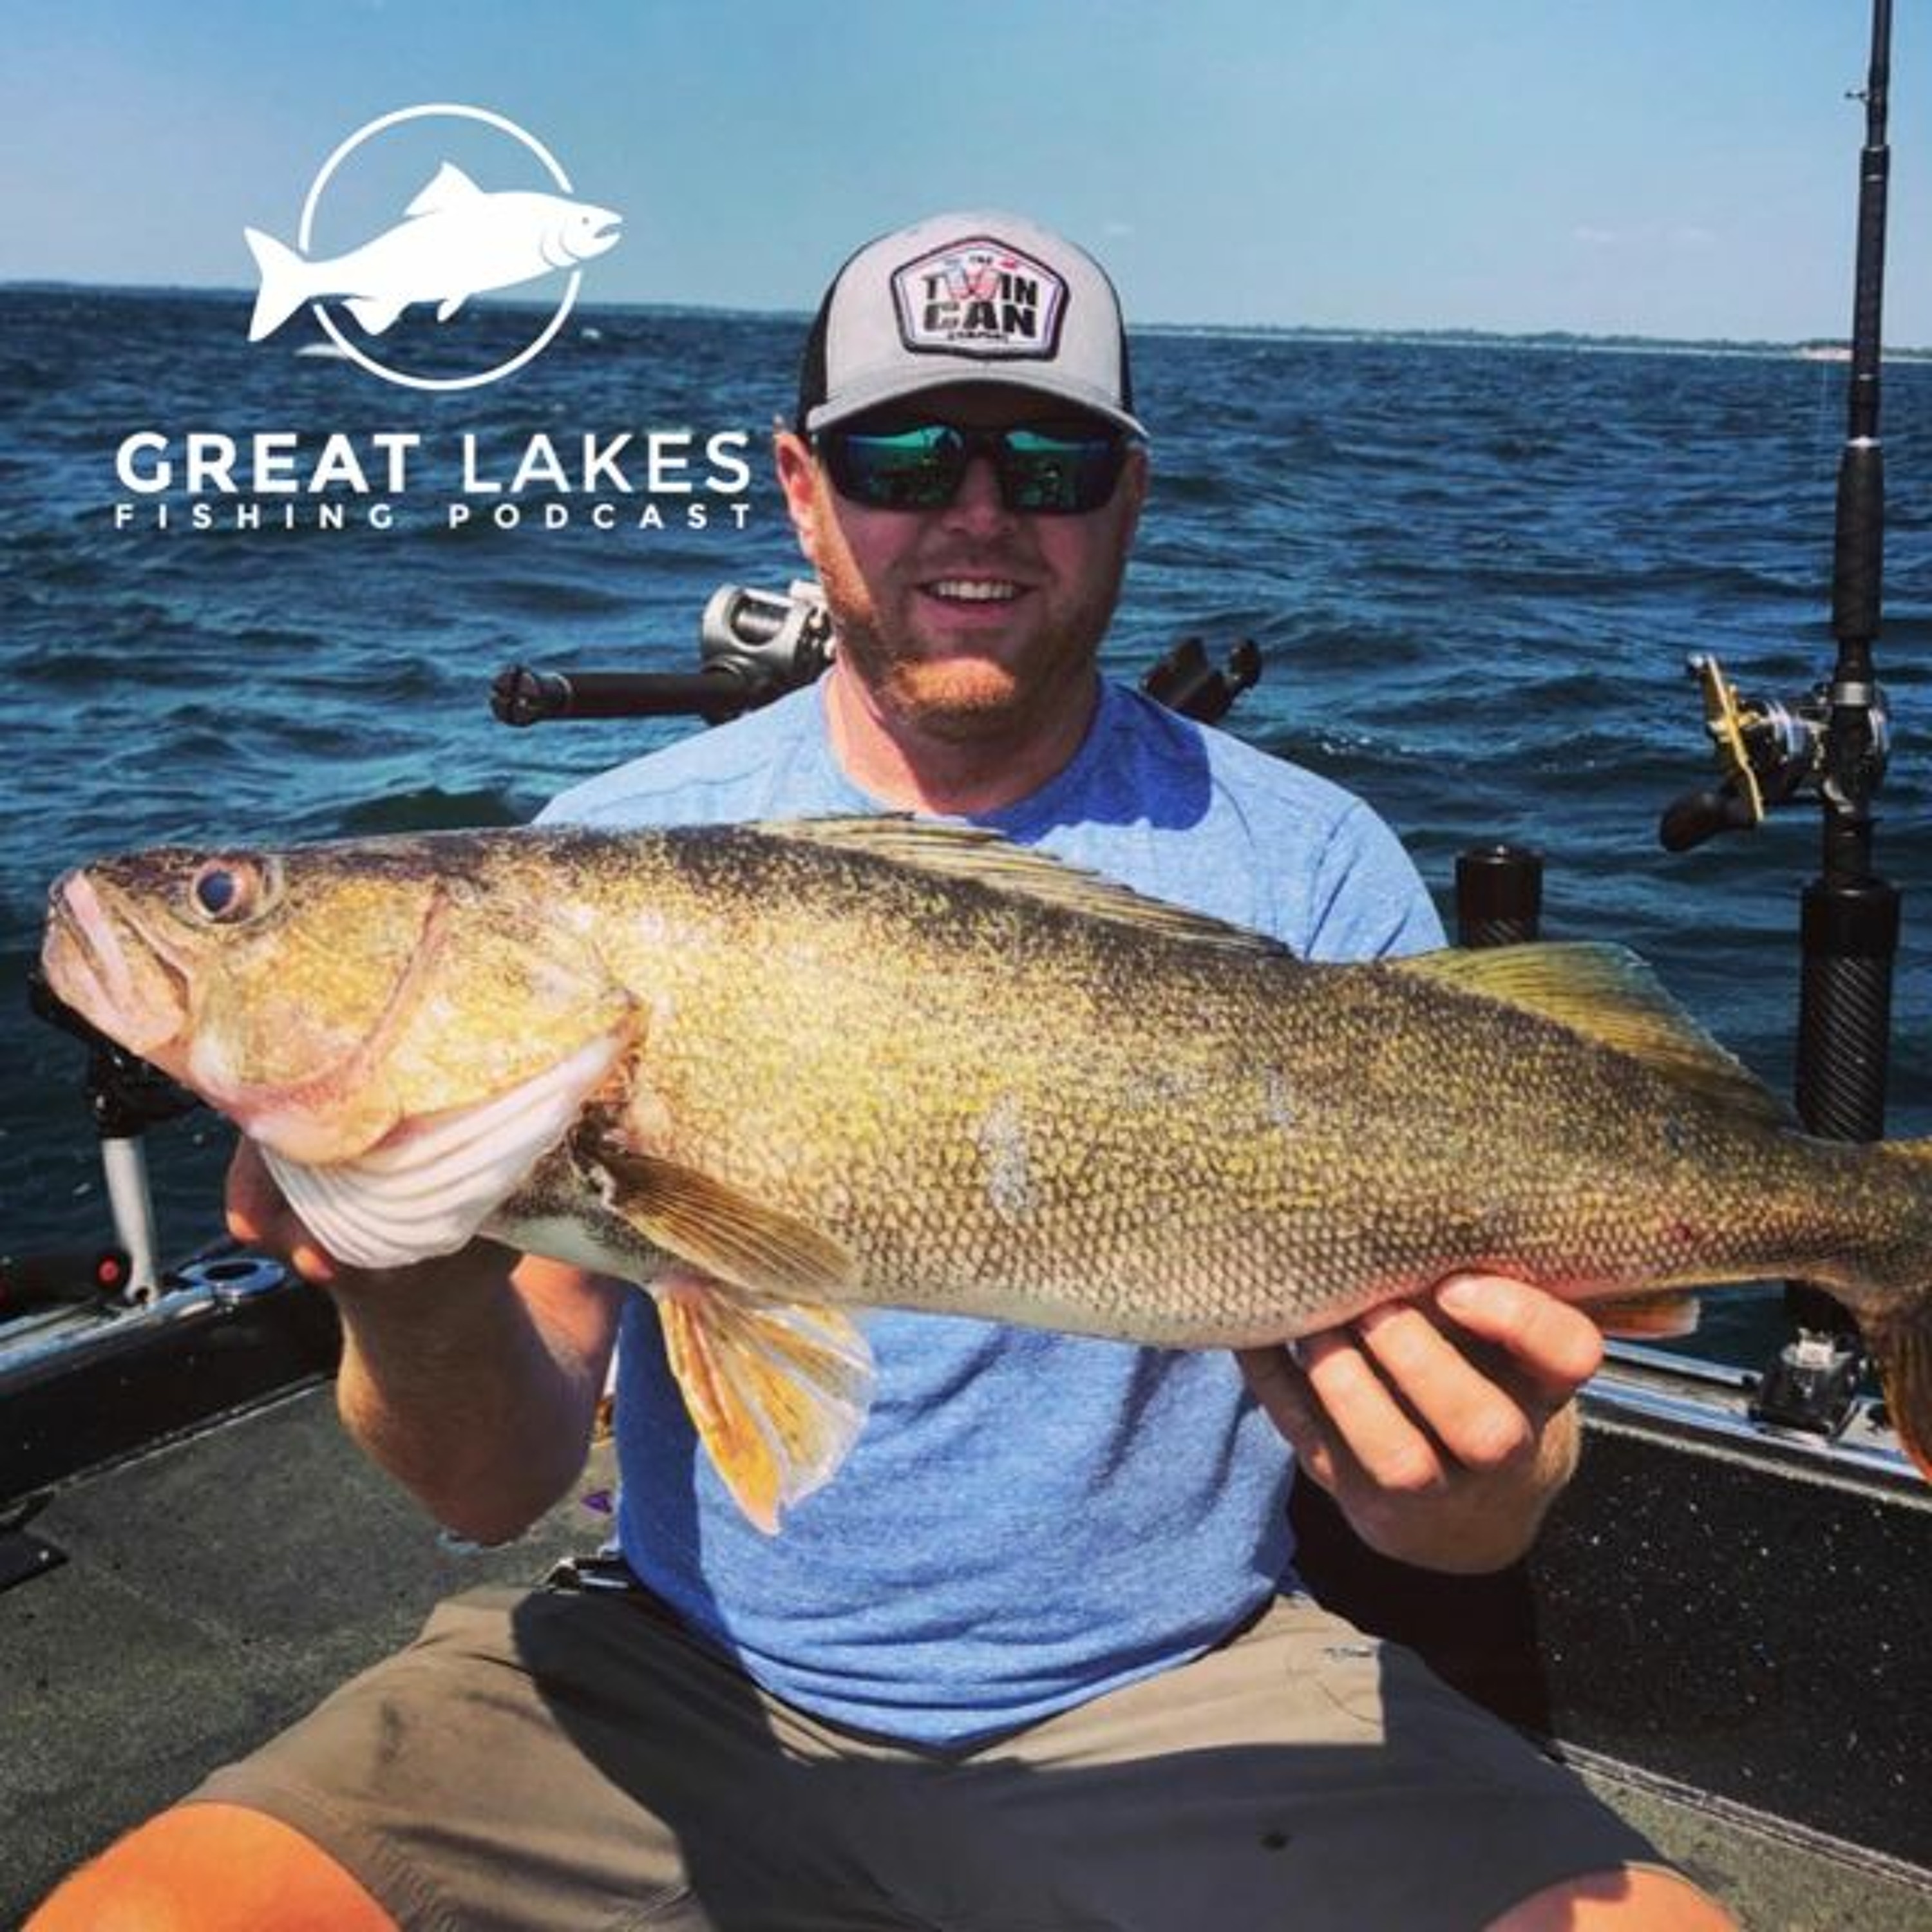 Fishing Lake Erie Walleyes With Inline Weights - Great Lakes Fishing Podcast Episode #61